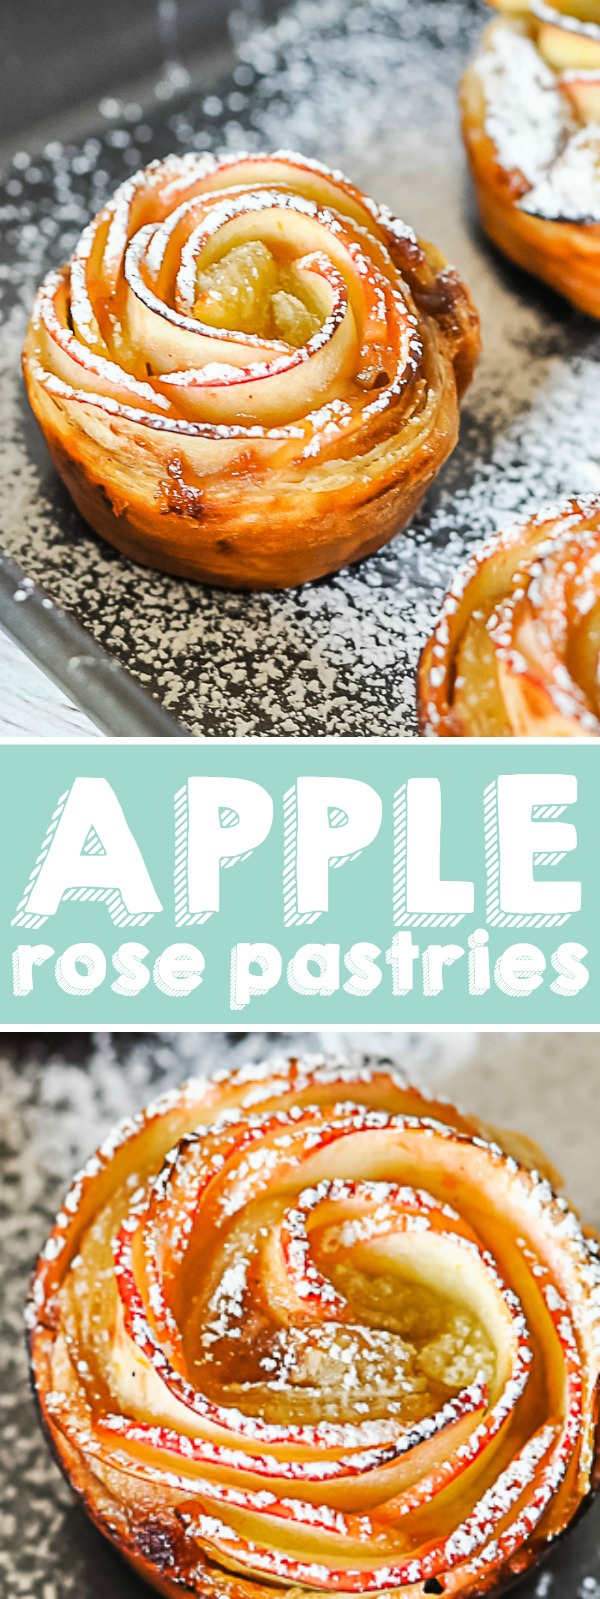 Make a gorgeous statement with this holiday dessert for Thanksgiving or Christmas! These Apple Roses Pastries are filled with thin apple slices and rich apple butter, then topped with a fine dusting of powder sugar! Everyone is going to love them! | THE LOVE NERDS #Christmasdessert #Christmasbrunch #Thanksgivingdessert #applepie